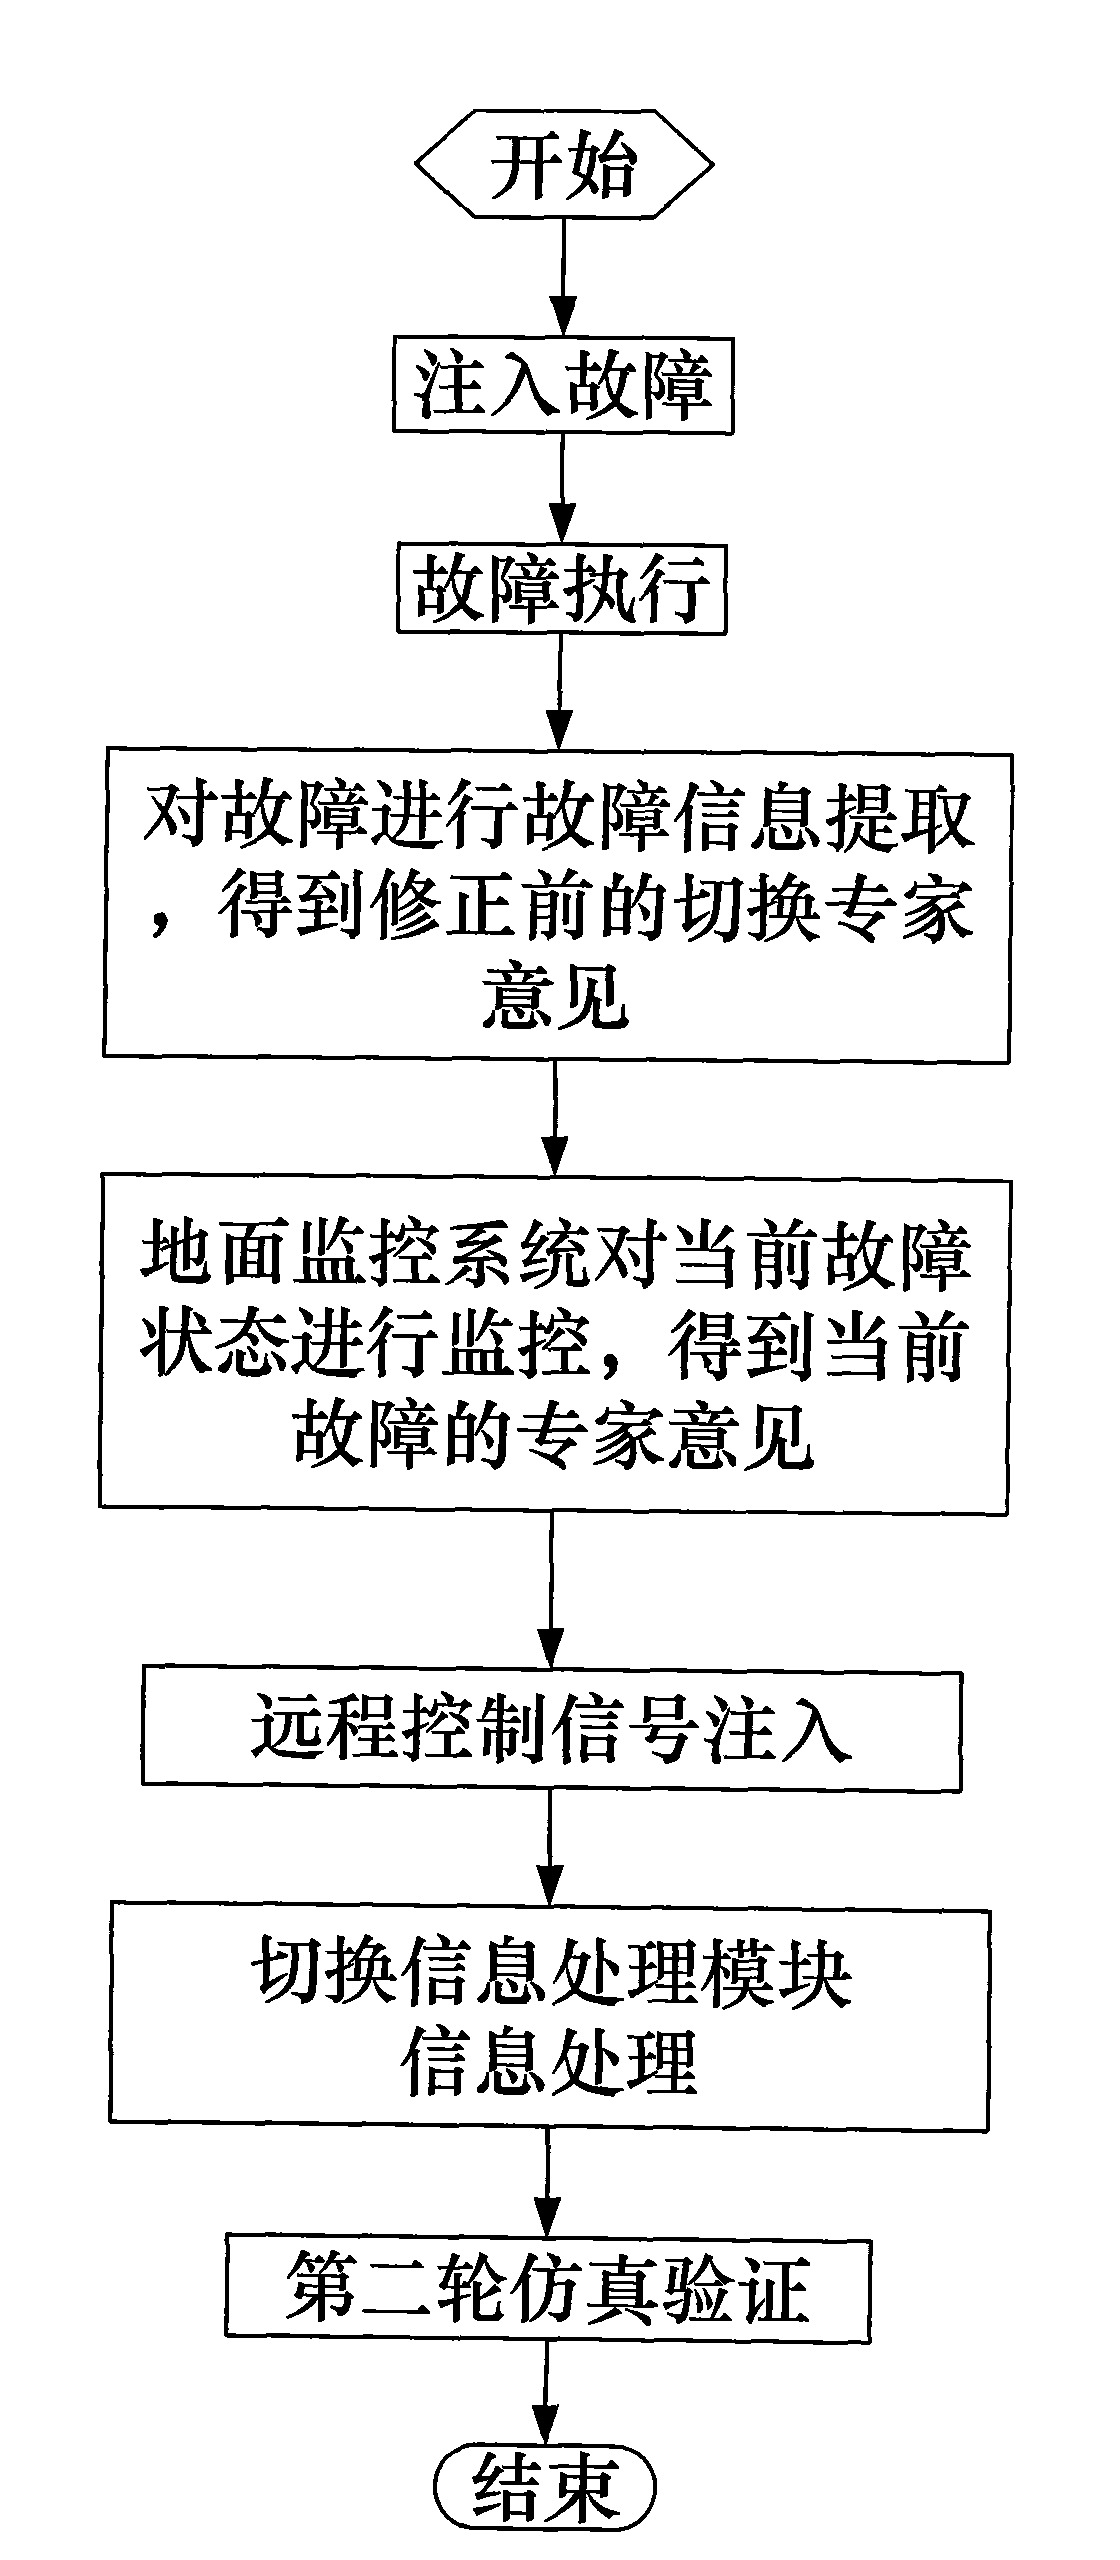 Self-correcting redundancy switching mechanism for spacecraft system and verification method thereof